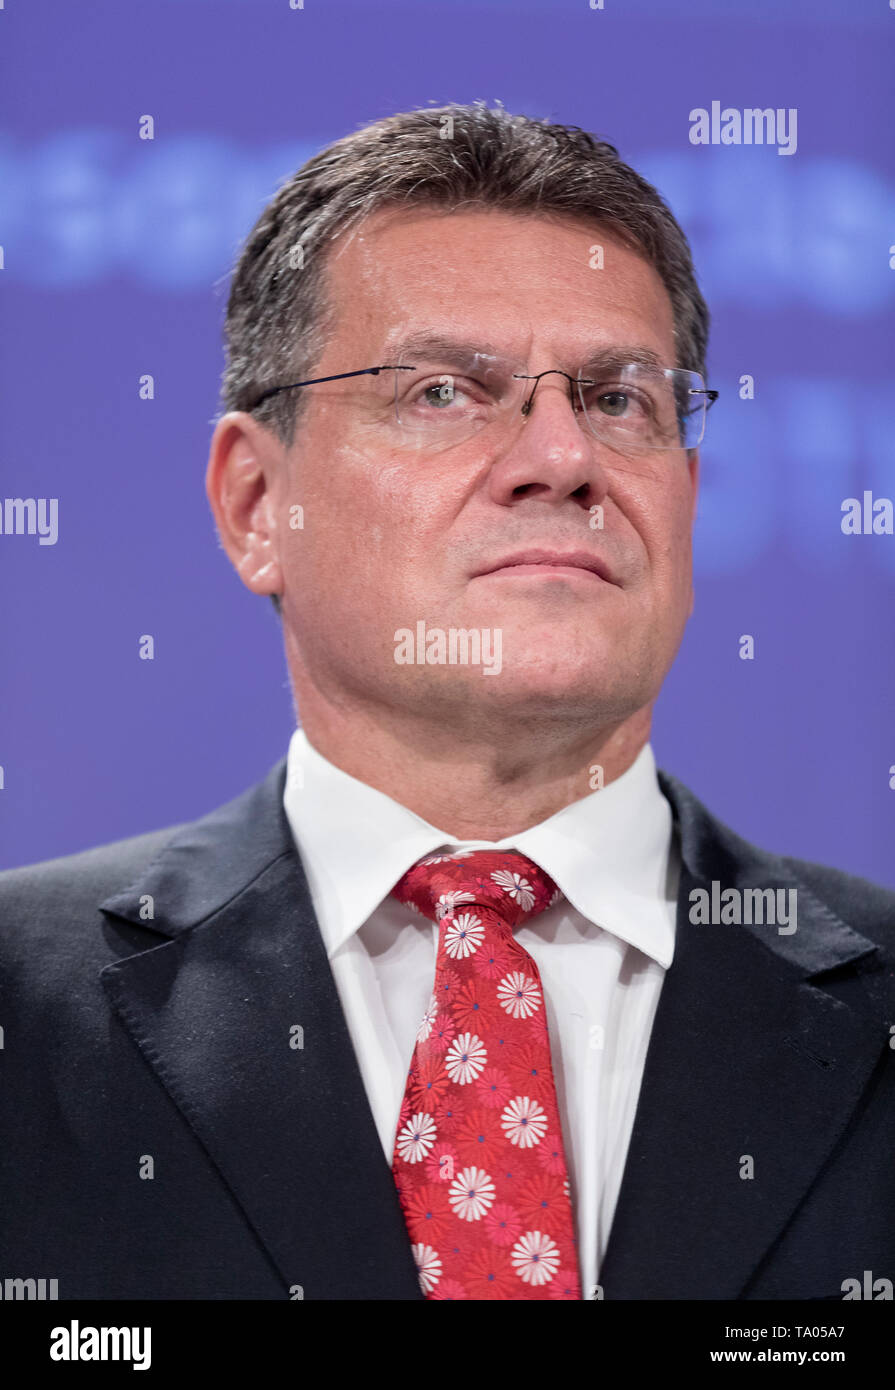 Belgium, Brussels, on 2018/09/14: press conference on seasonal clock changes with Maros Sefcovic, Vice President of the Commission for the Energy Unio Stock Photo